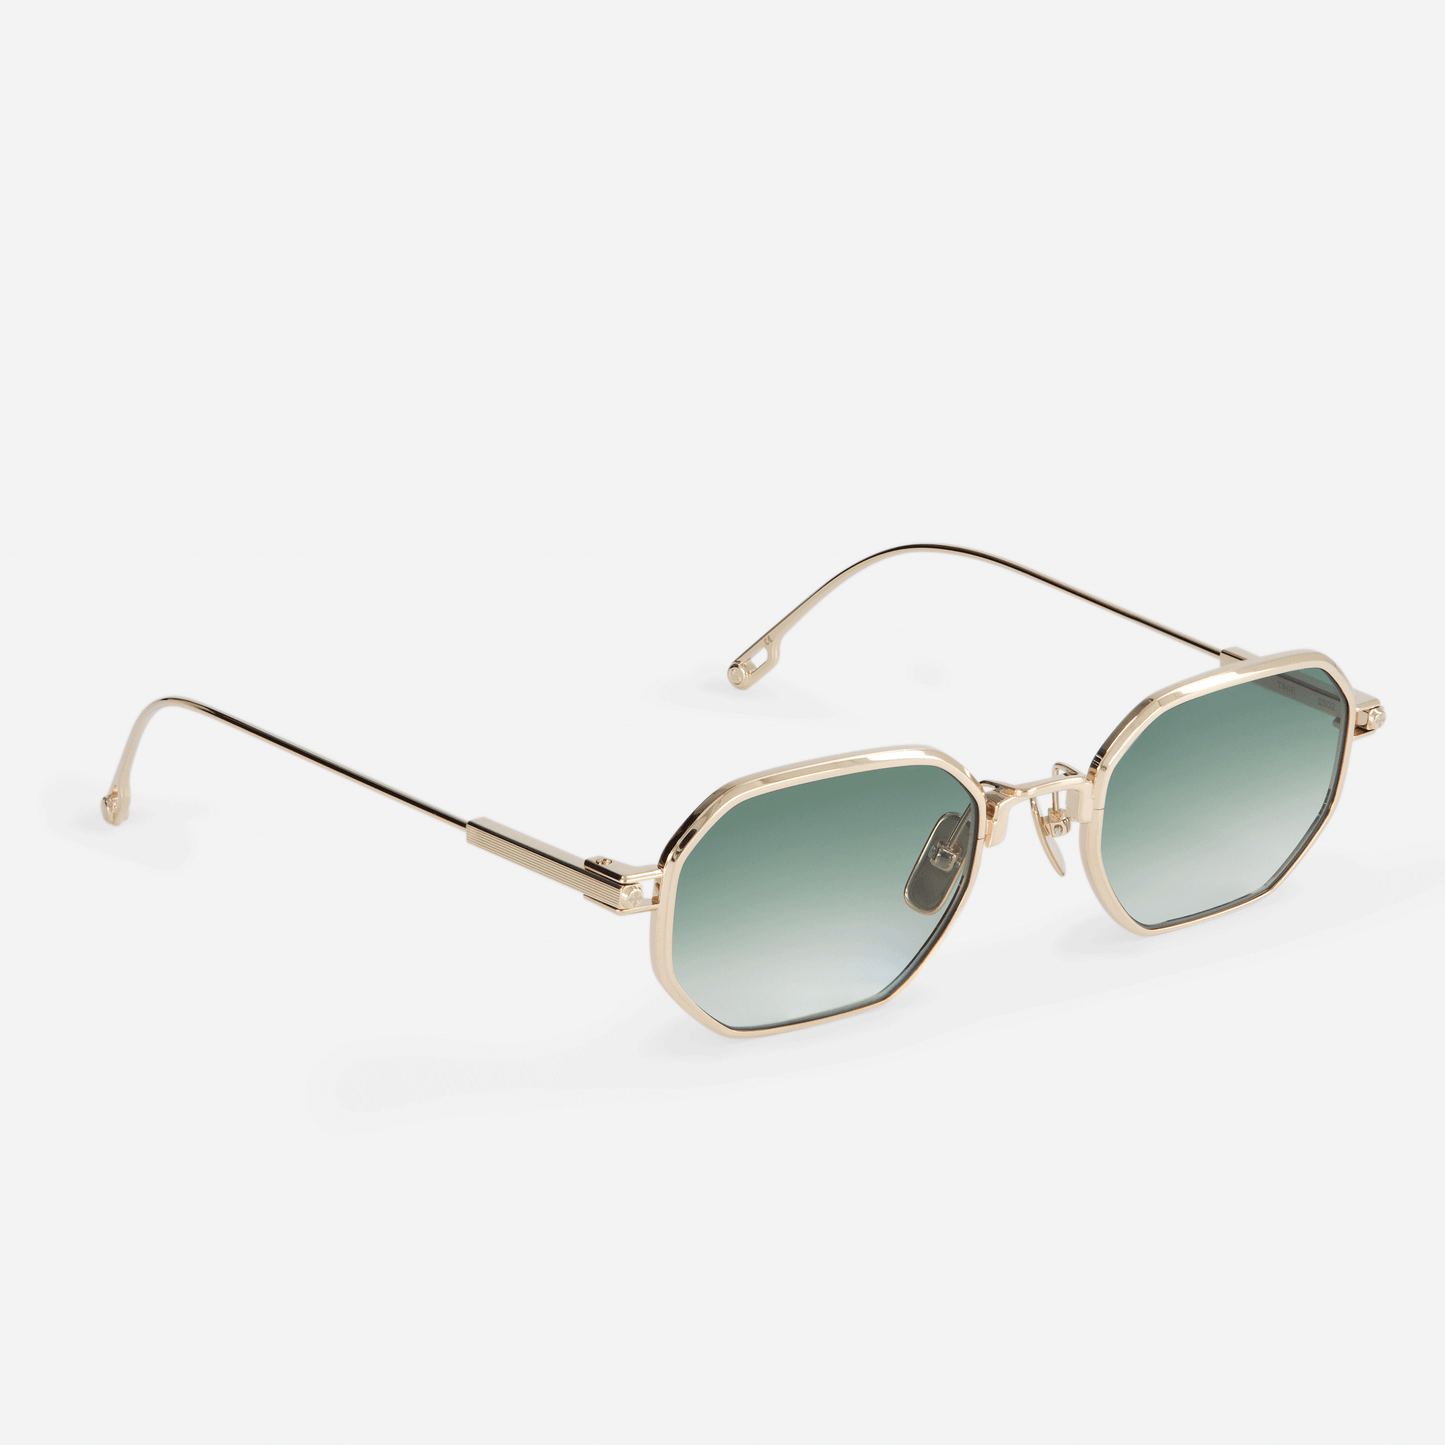 Timir S502 hexagonal glasses, meticulously handcrafted from premium Japanese titanium in the striking Lunar Gold hue, featuring mesmerizing olive gradient lenses.